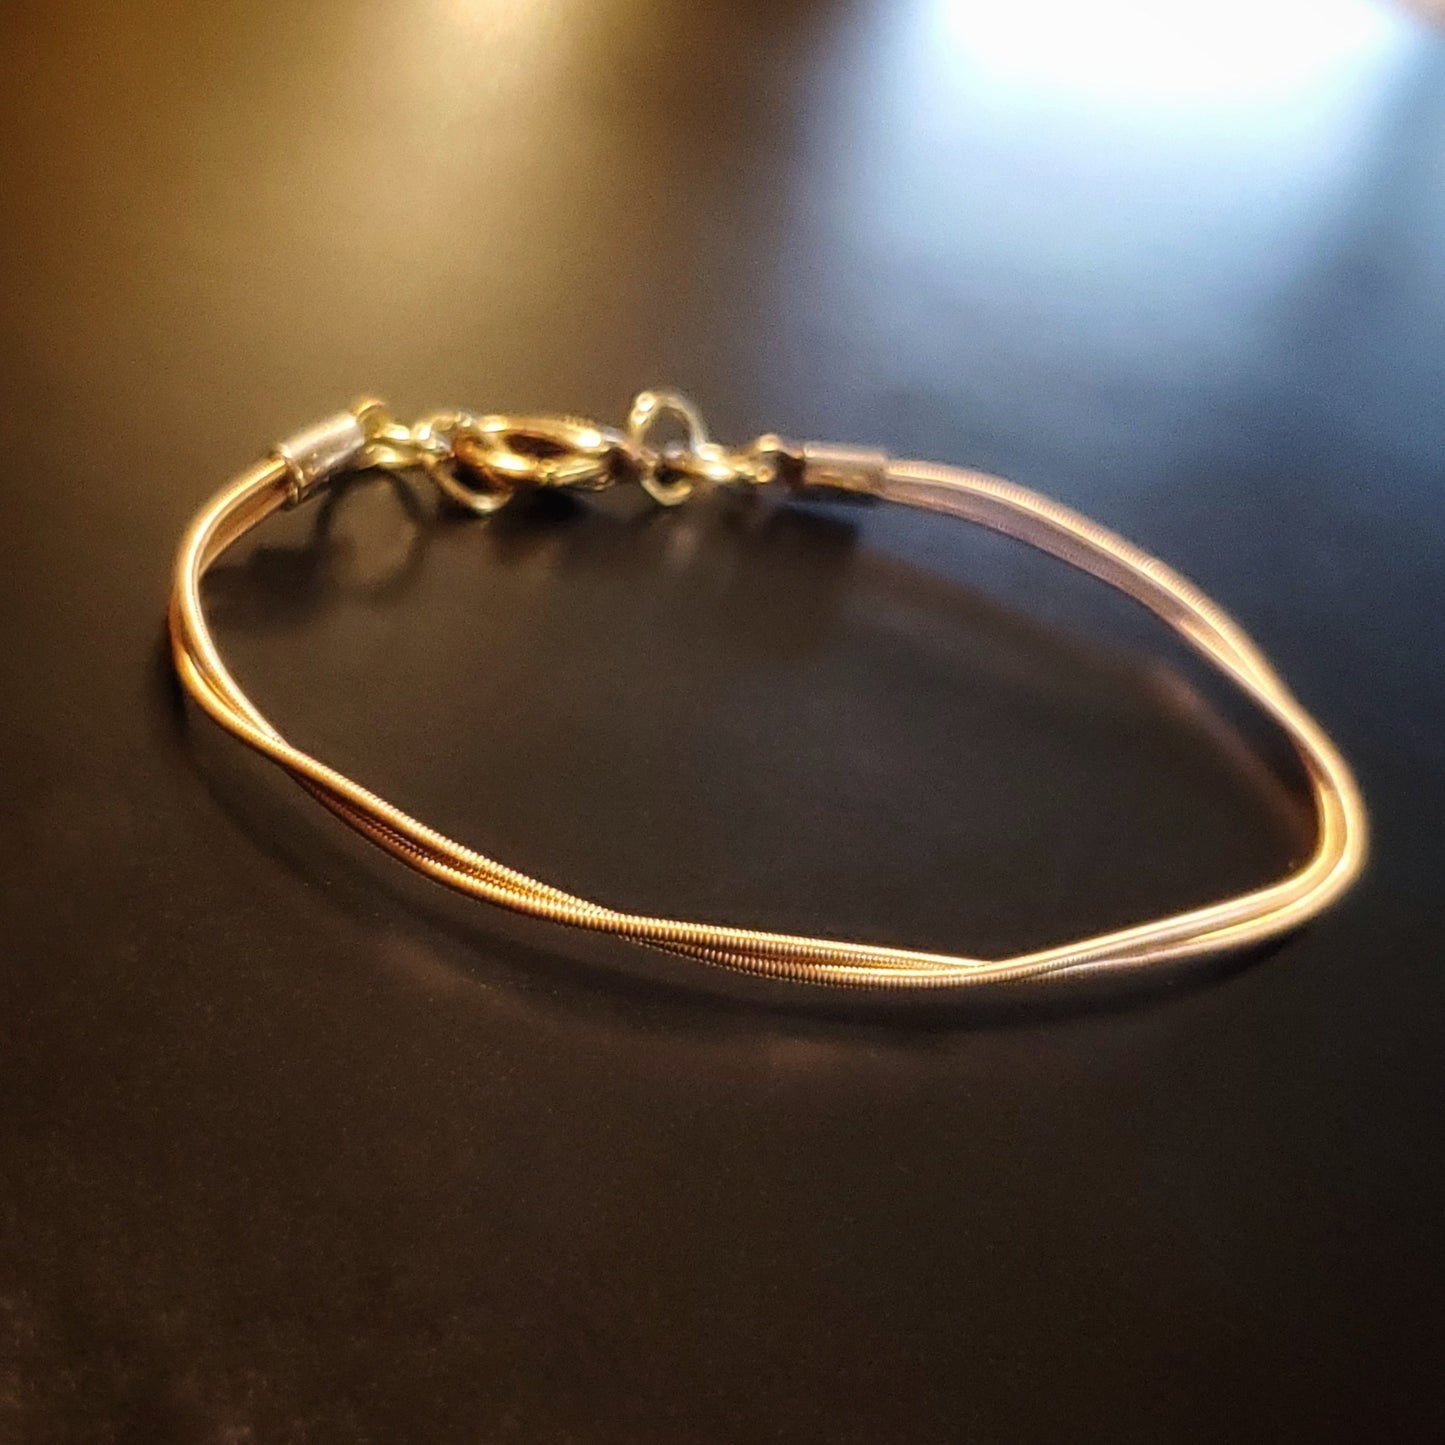 clasp style bracelet made from an upcycled mandolin string 